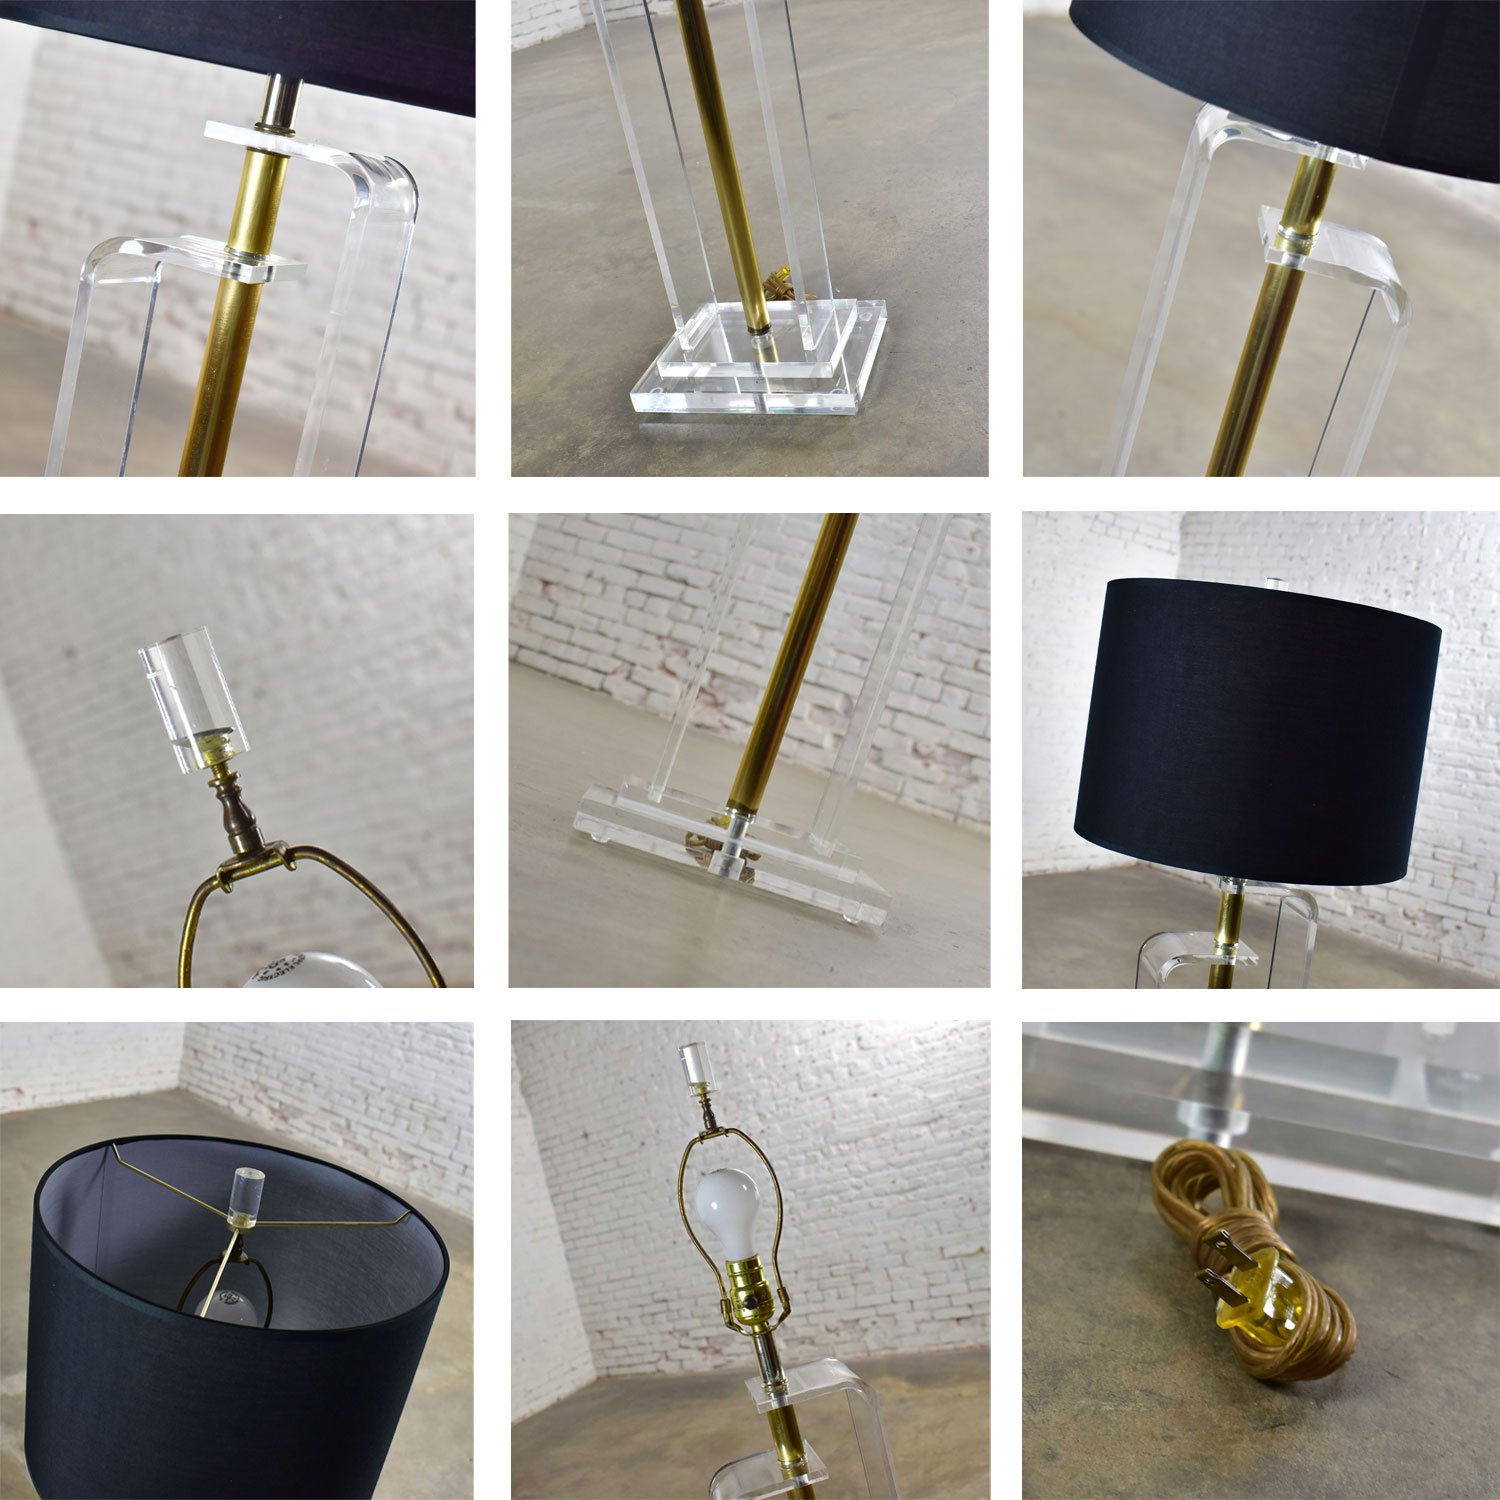 Art Deco Revival Hollywood Regency Lucite and Brass Plate Floor Lamp